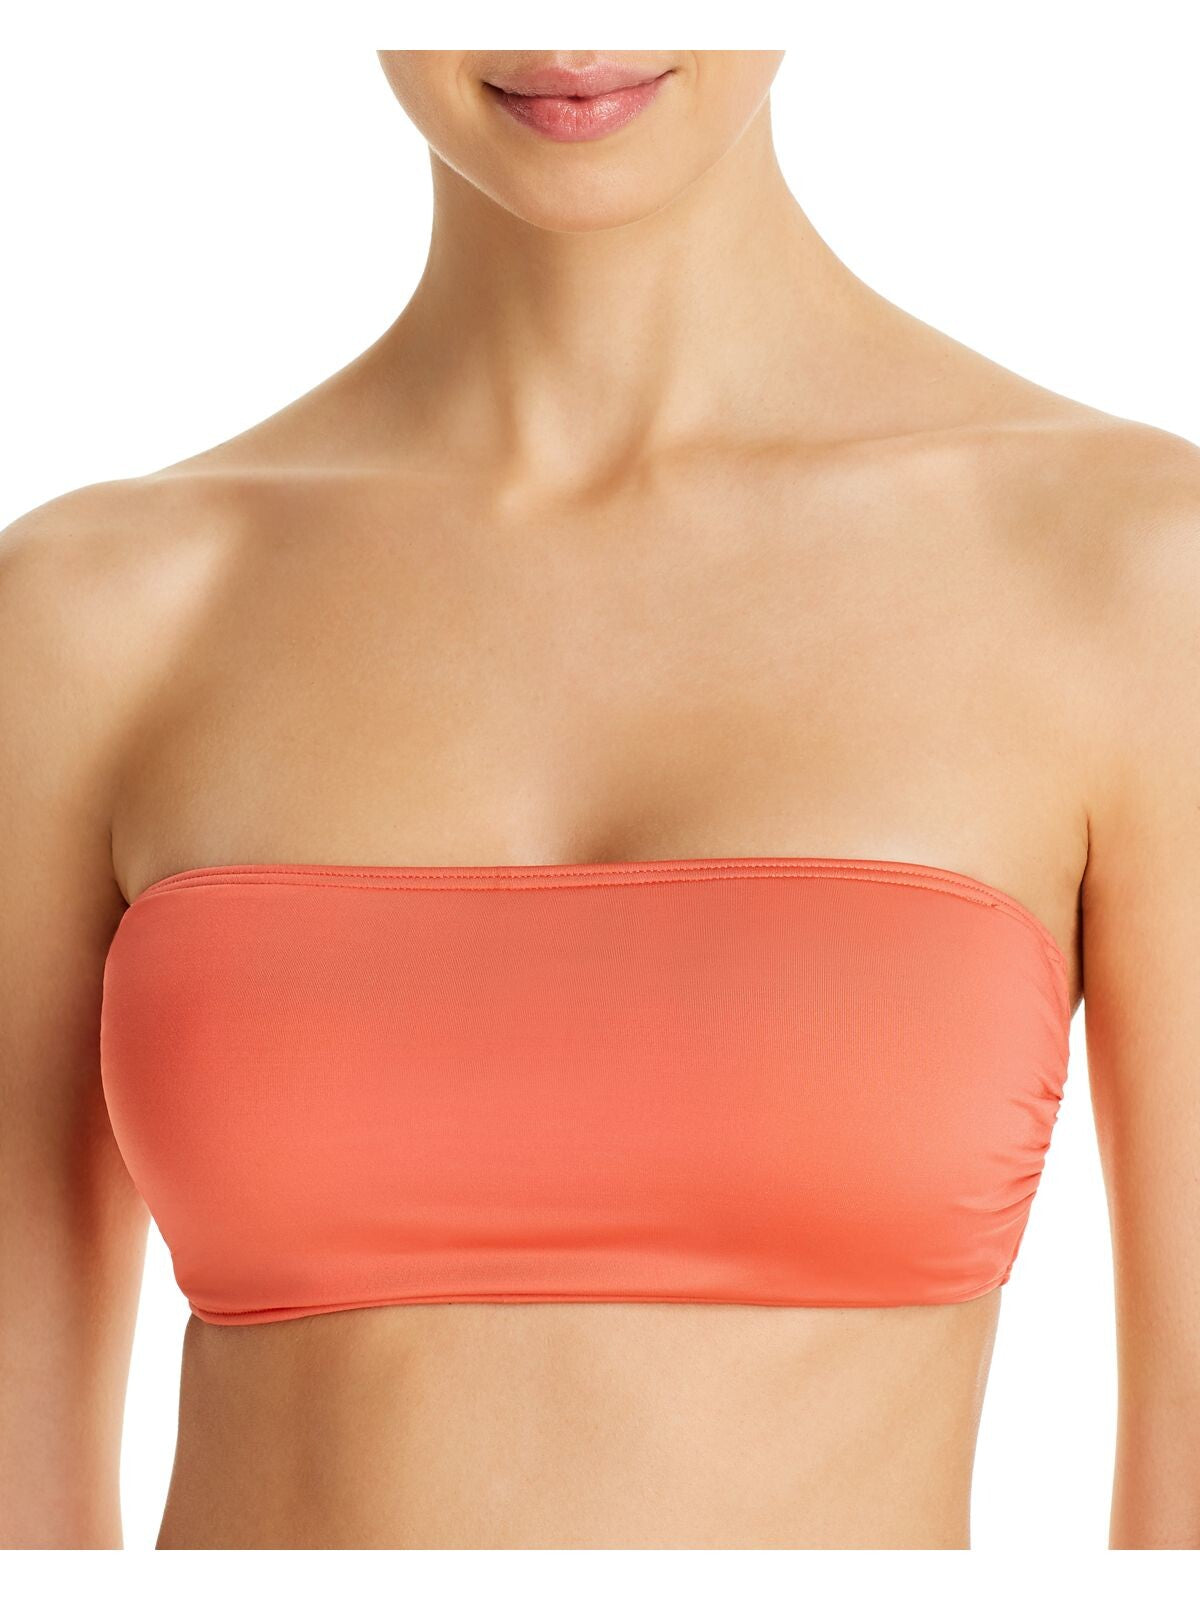 KATE SPADE NEW YORK Women's Coral Stretch Bikini Removable Cups Convertible Adjustable Bandeau Swimsuit Top XS